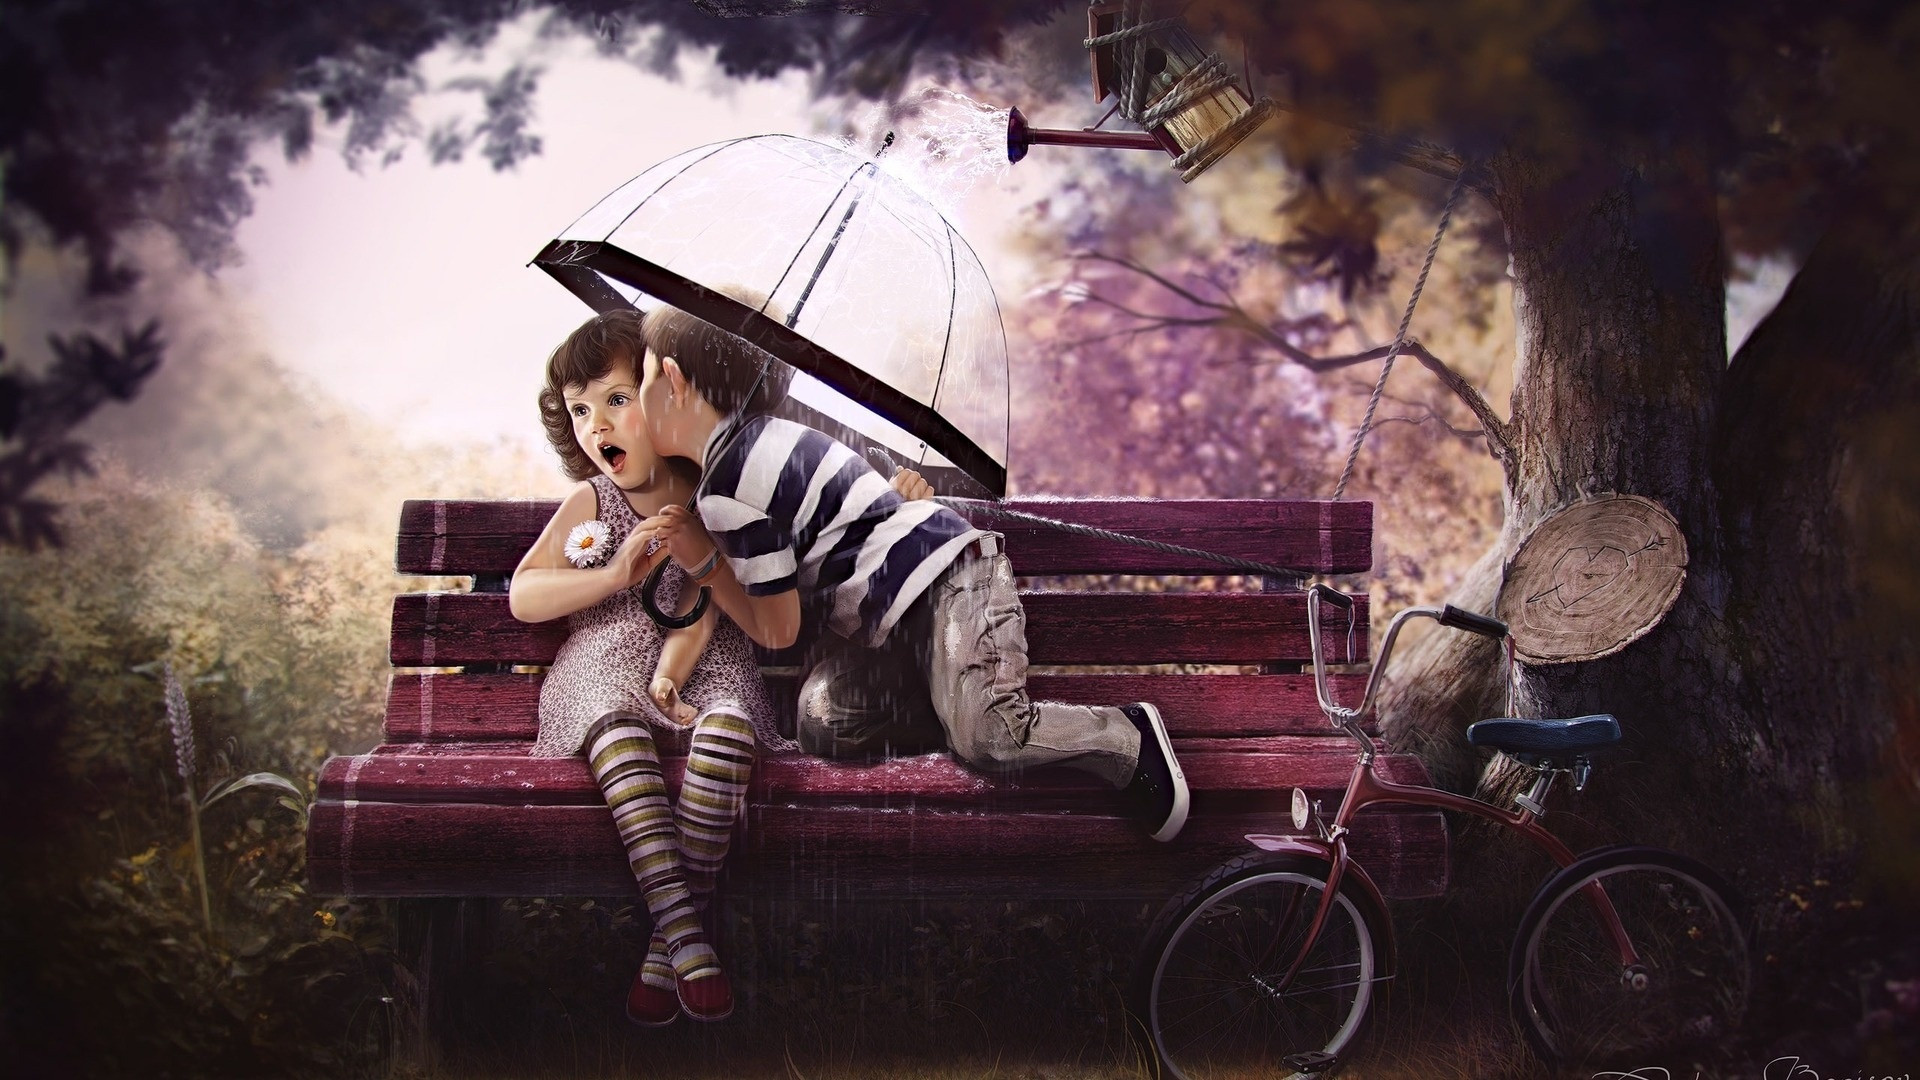 1920x1080 Art Boy And Girl Wallpaper Hd Boy And Girl | Love | Pictures And Wallpaper  For